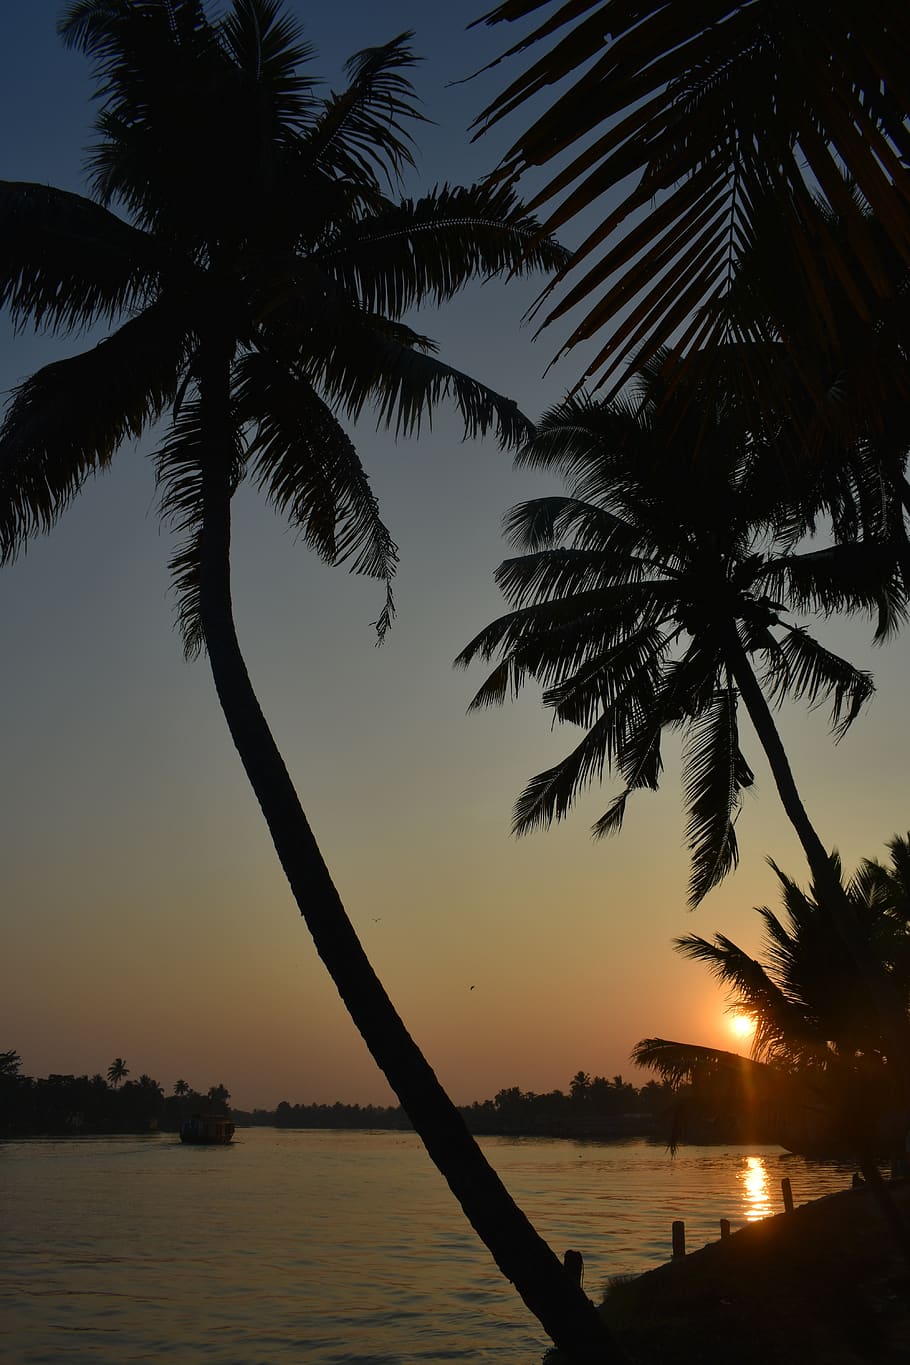 alleppey, alappuzha, kerala, india, asia, river, water, backwaters, palm tree, exotic